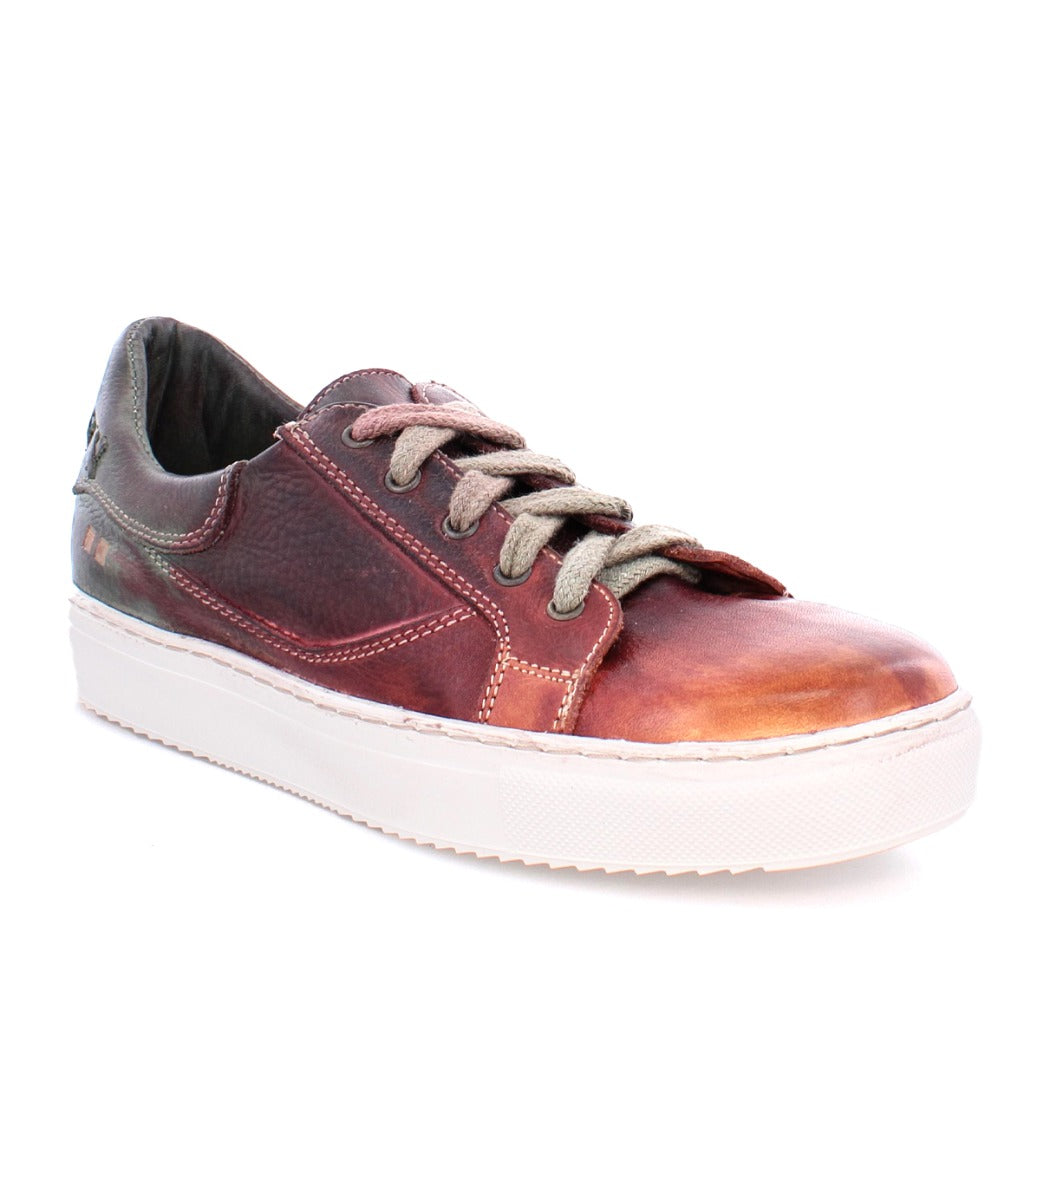 A women's Azeli burgundy leather sneaker with white soles from Bed Stu.